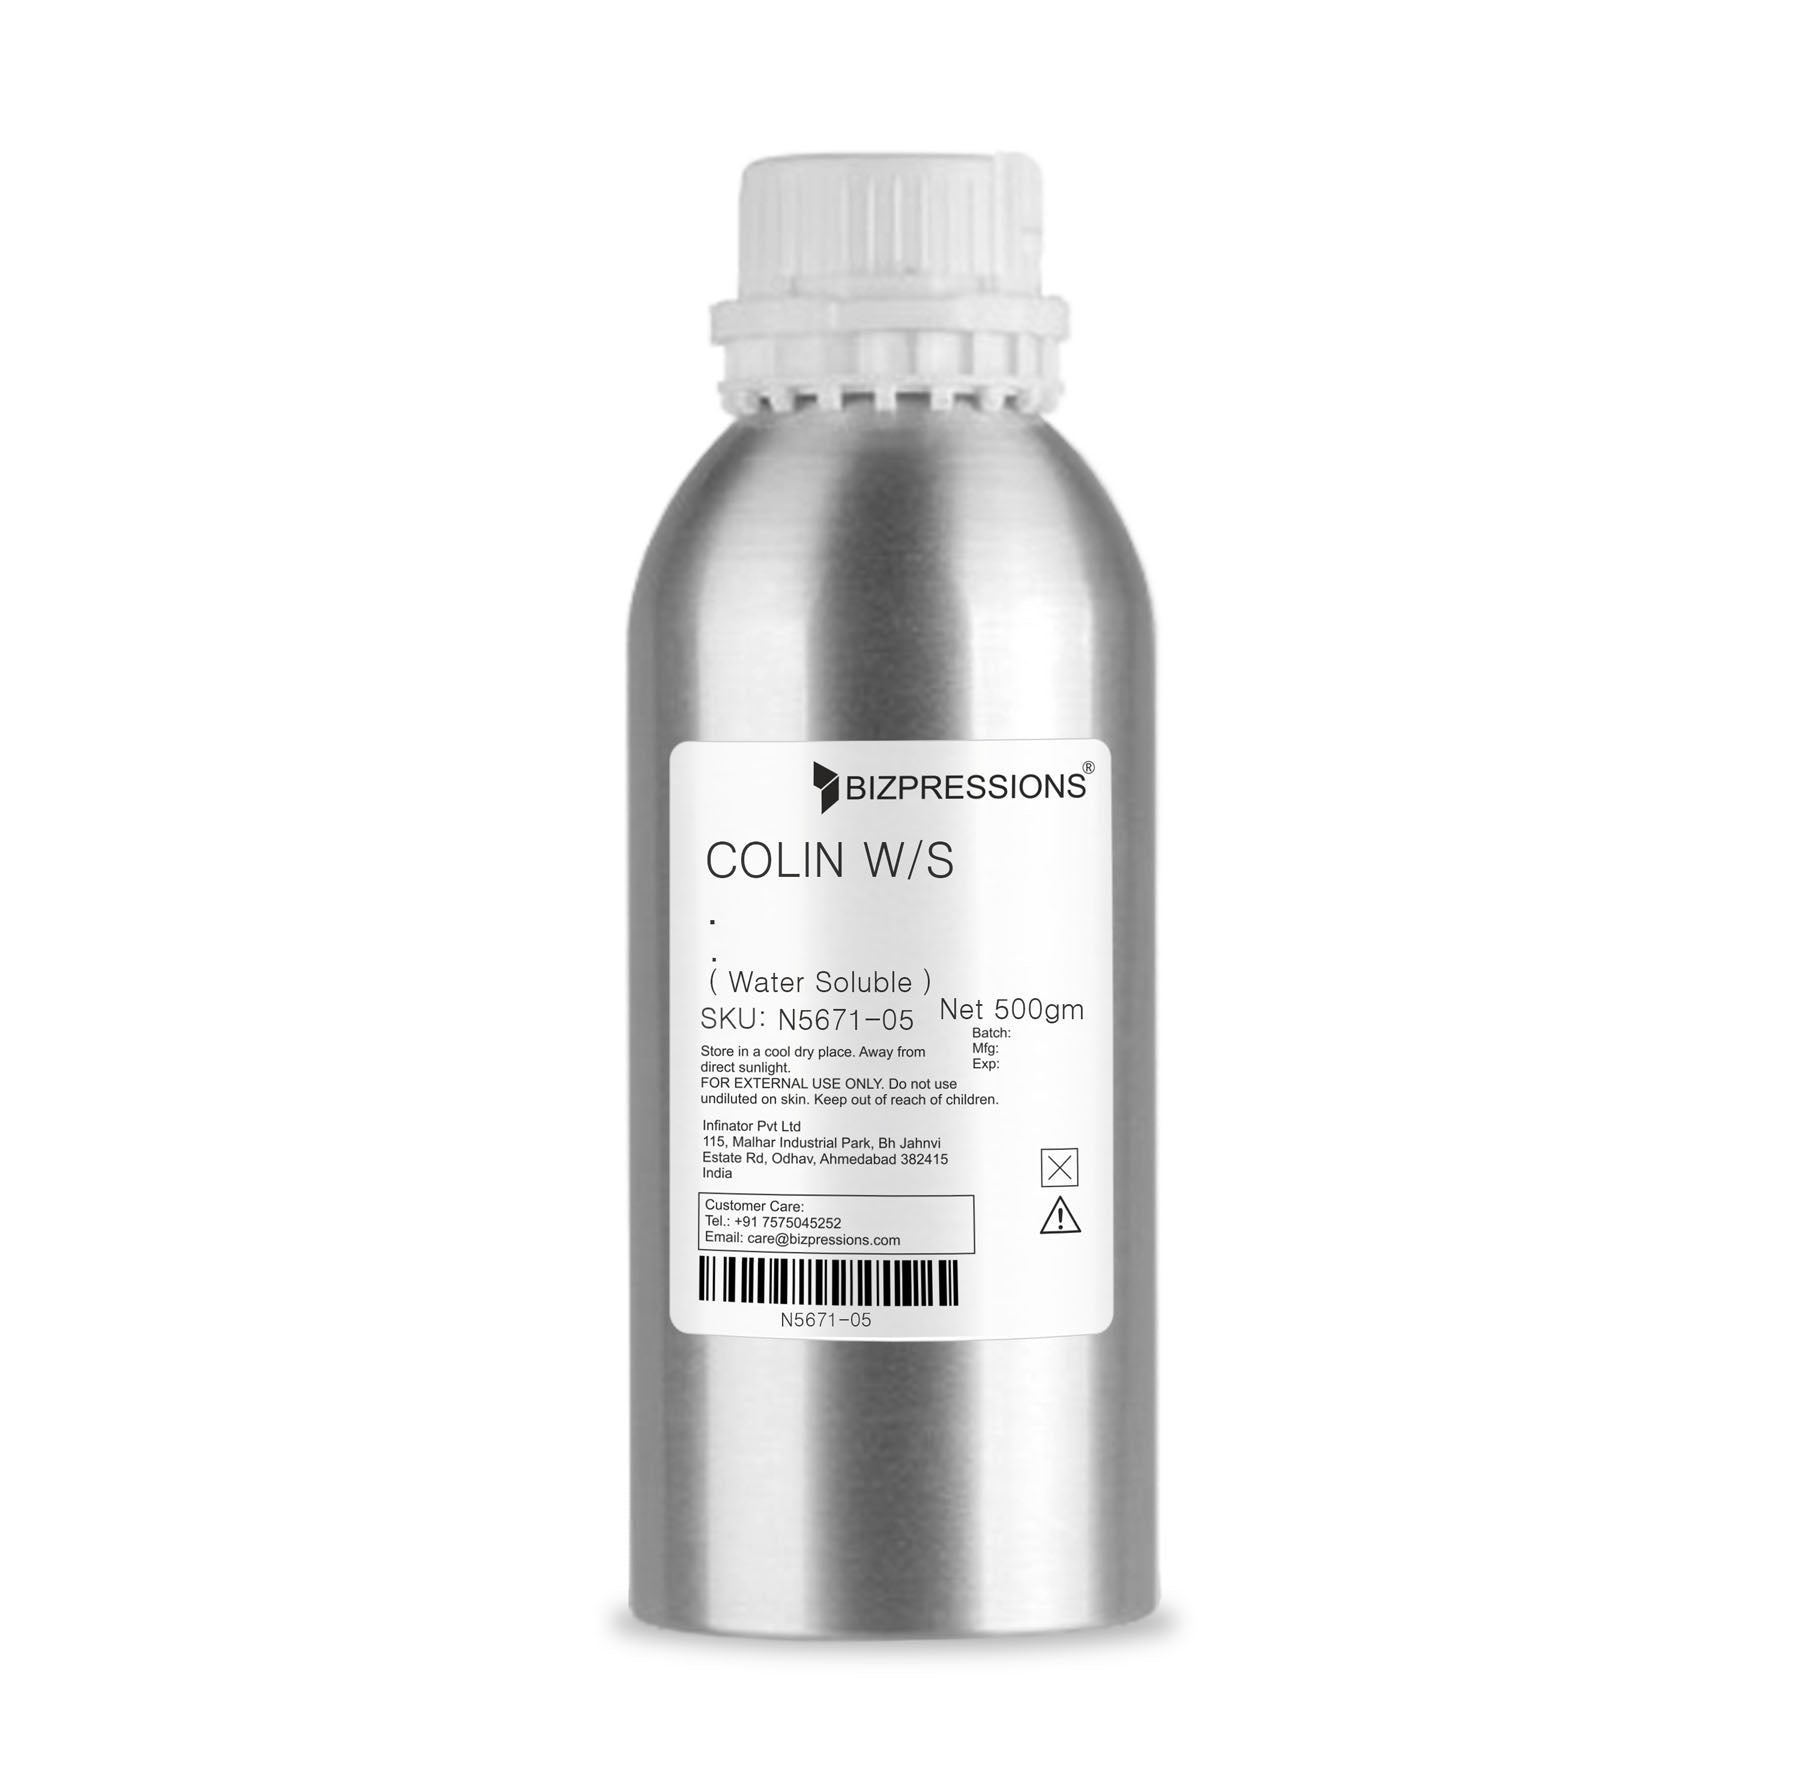 COLIN W/S - Fragrance ( Water Soluble ) - 500 gm